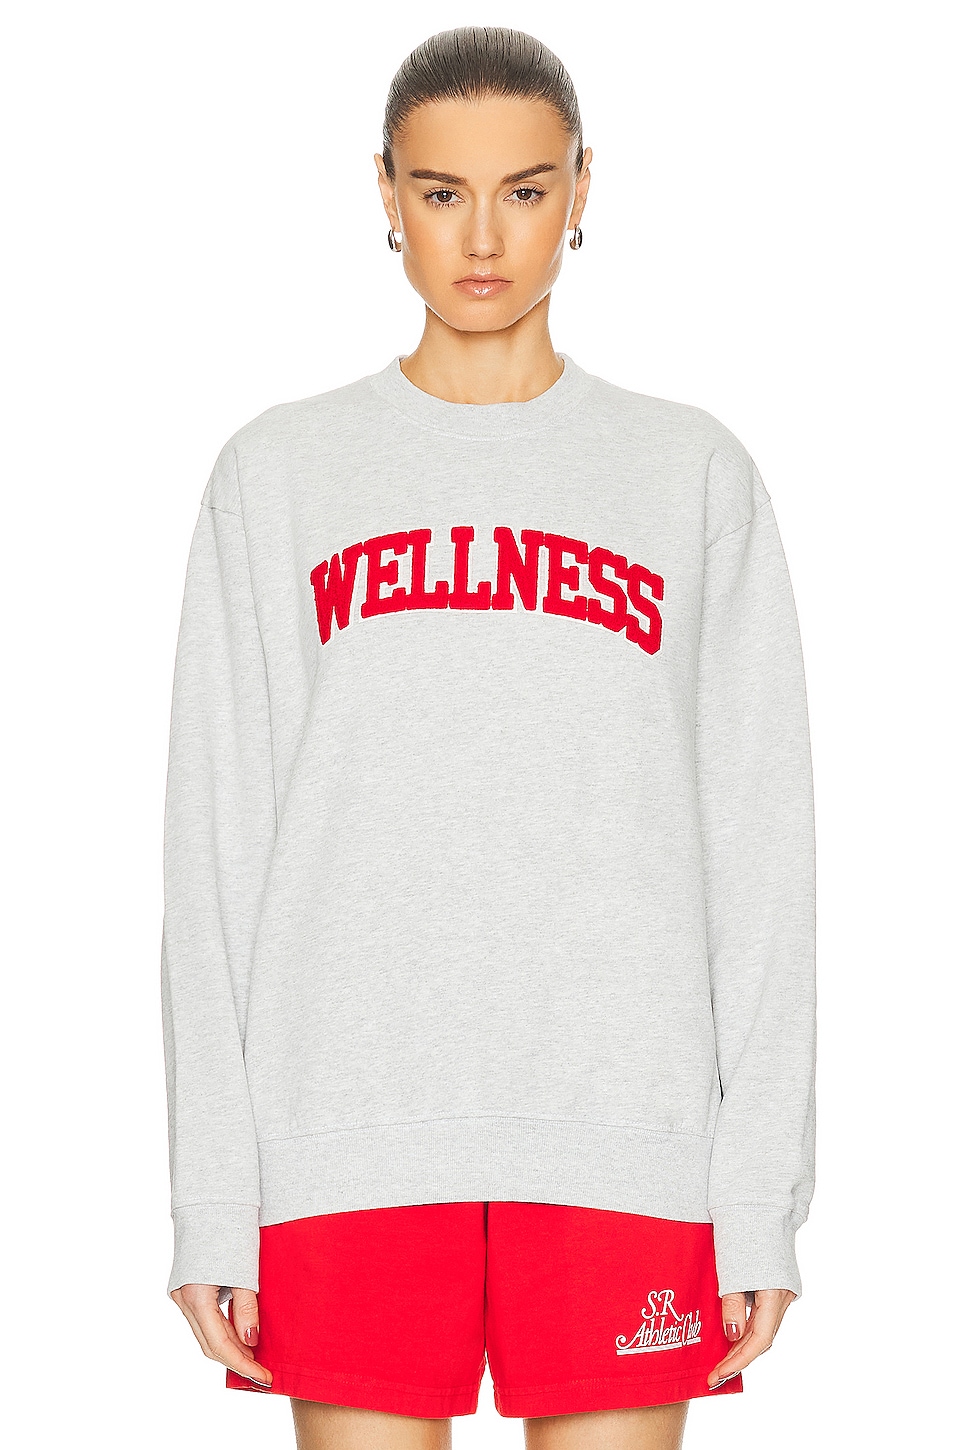 Image 1 of Sporty & Rich Wellness Ivy Boucle Crewneck Sweater in Heather Gray